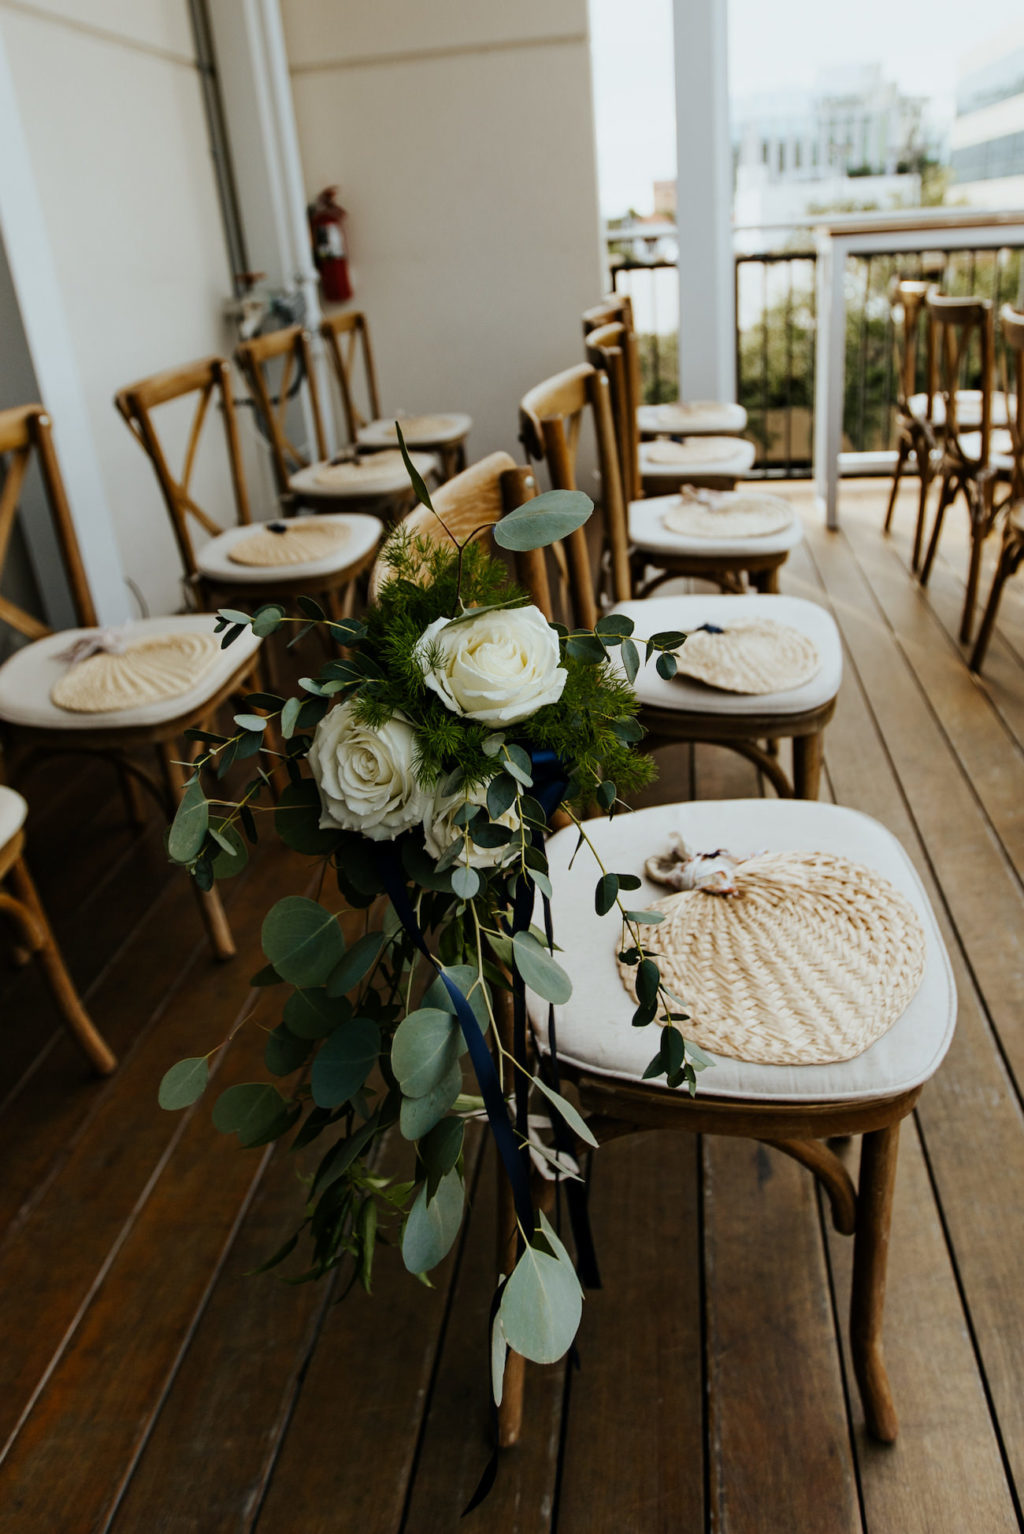 Rooftop Wedding Ceremony with Wood Cross Back Chairs and Rattan Straw Woven Hand Fans | Ceremony Aisle Floral Marker Arrangements with White Roses and Eucalyptus Greenery